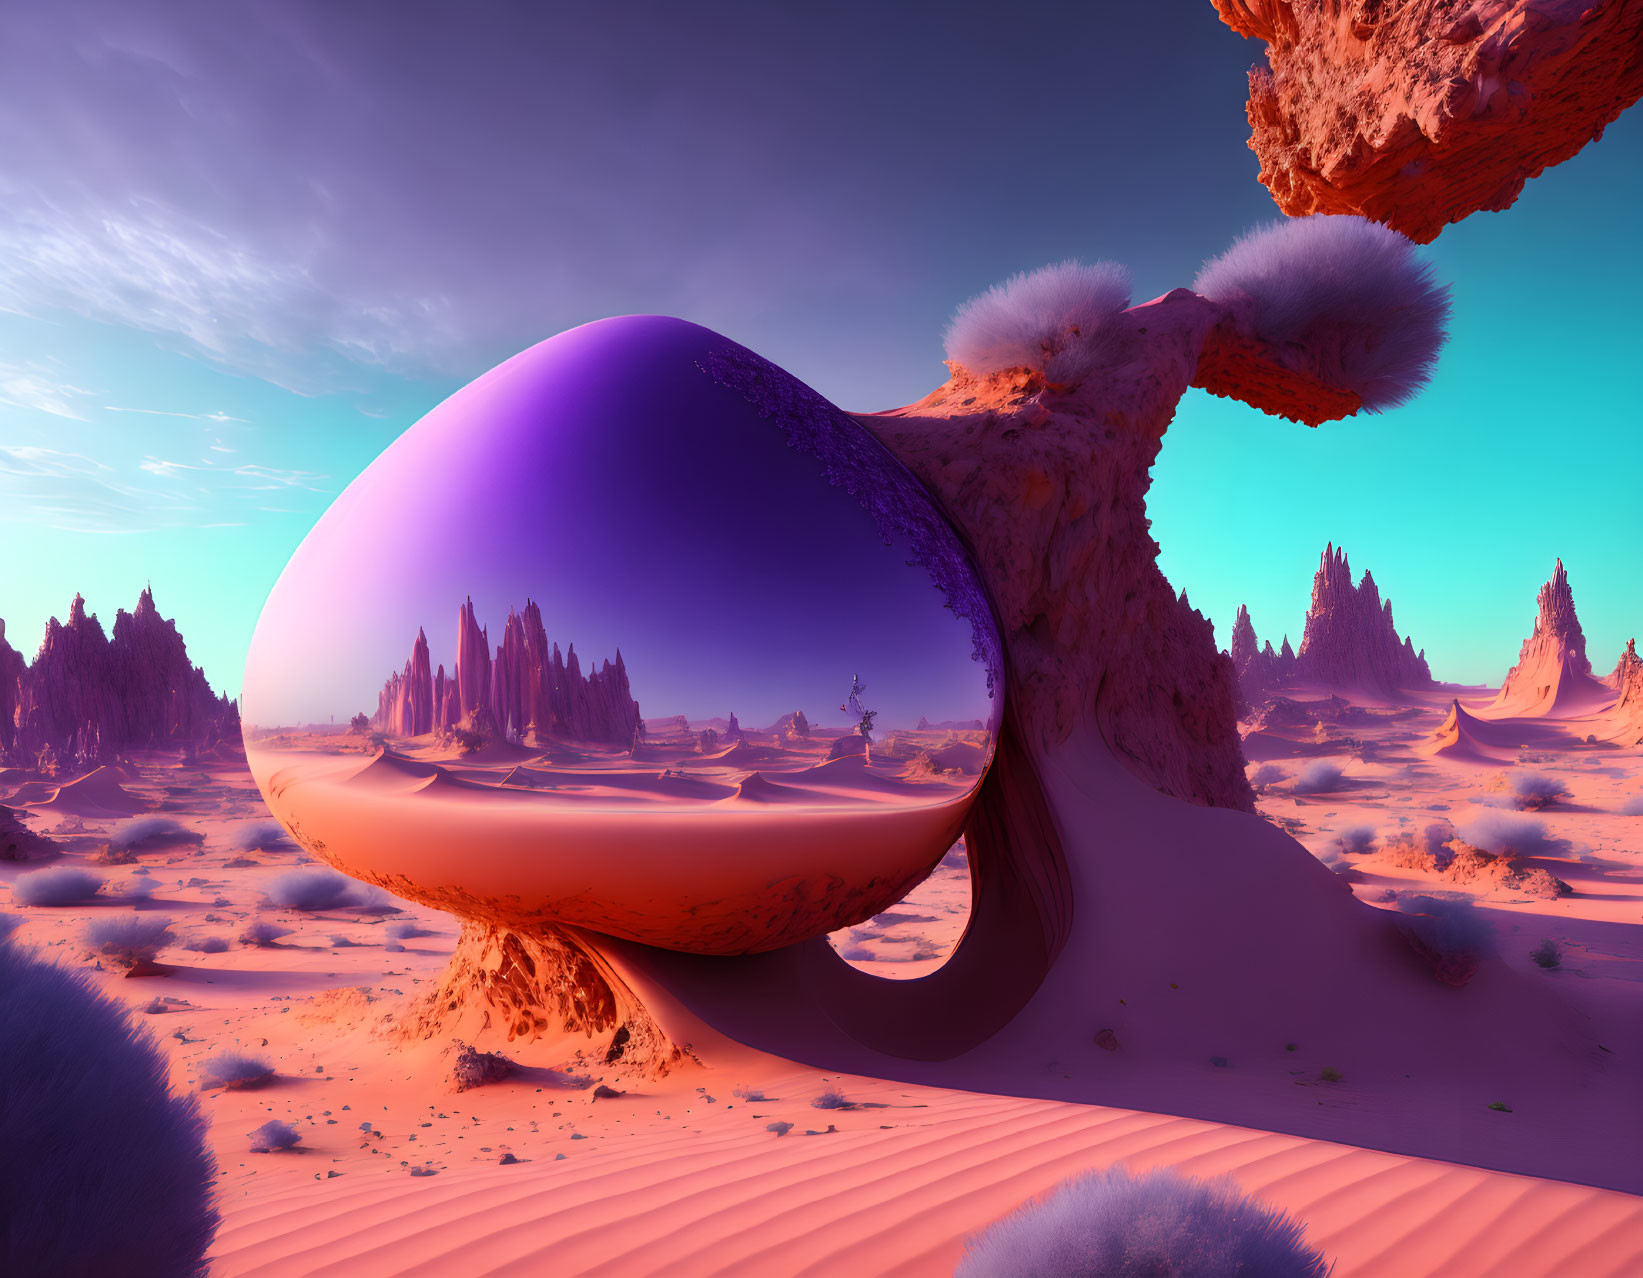 Surreal desert landscape with reflective egg-shaped object and odd rock formations